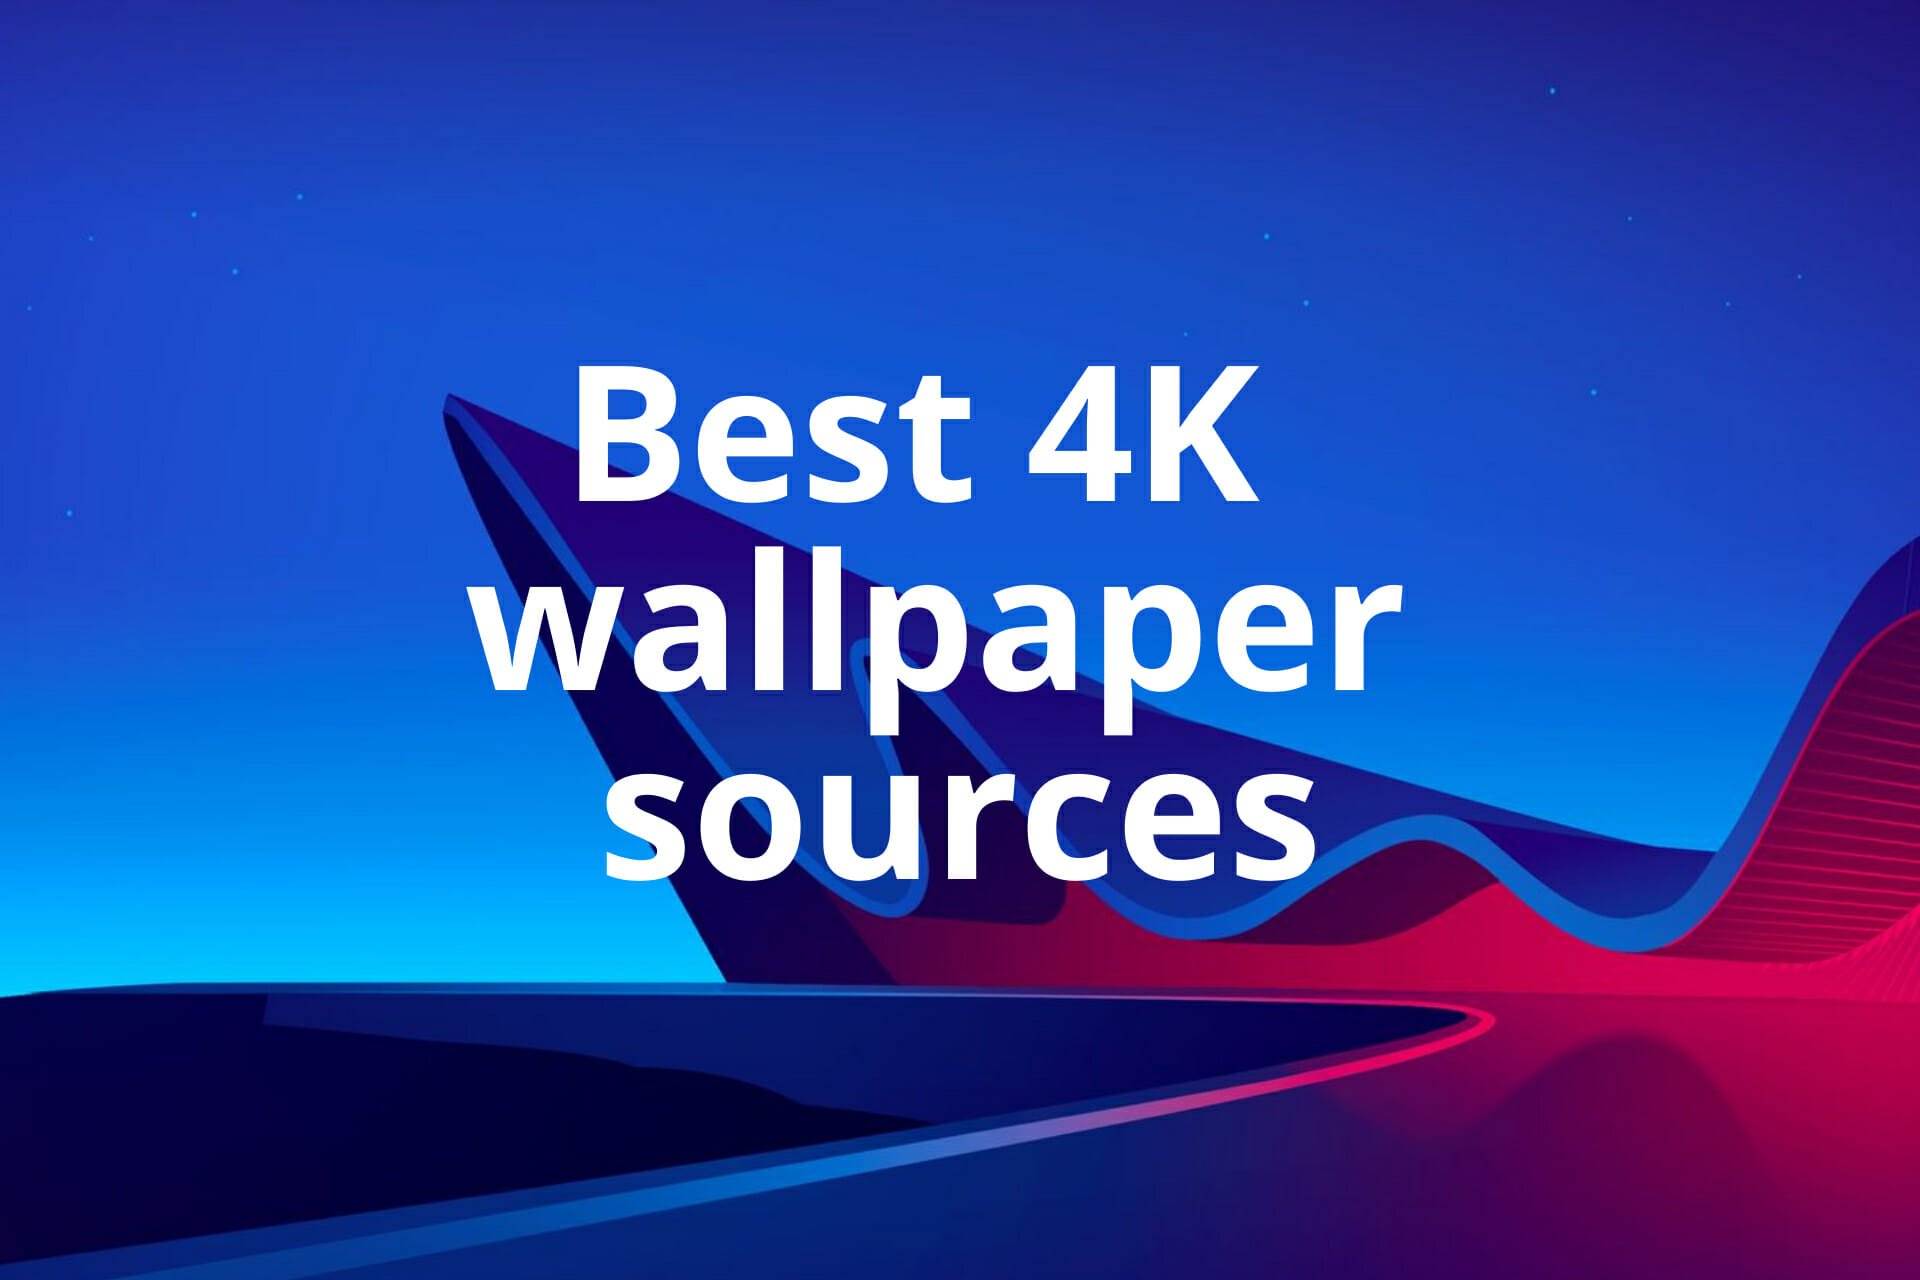 Download] Windows 10 official 4K theme 'Best of Wallpapers 2019' is now  available in Store - WinCentral